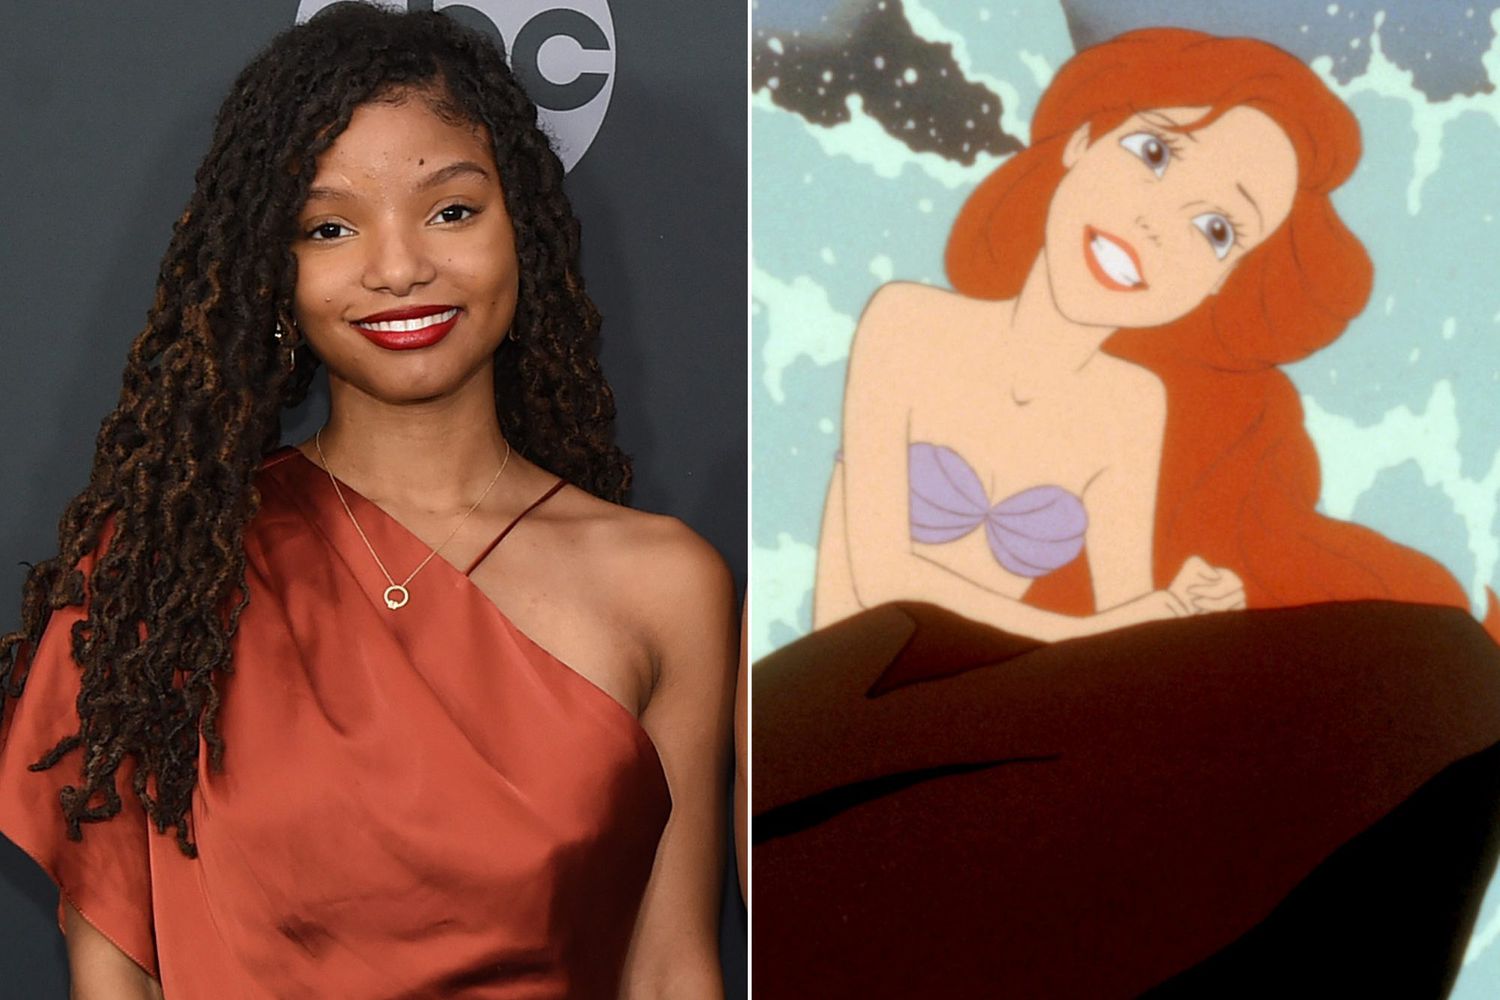 Halle Bailey Cast as Ariel in the Live-Action Little Mermaid | PEOPLE.com